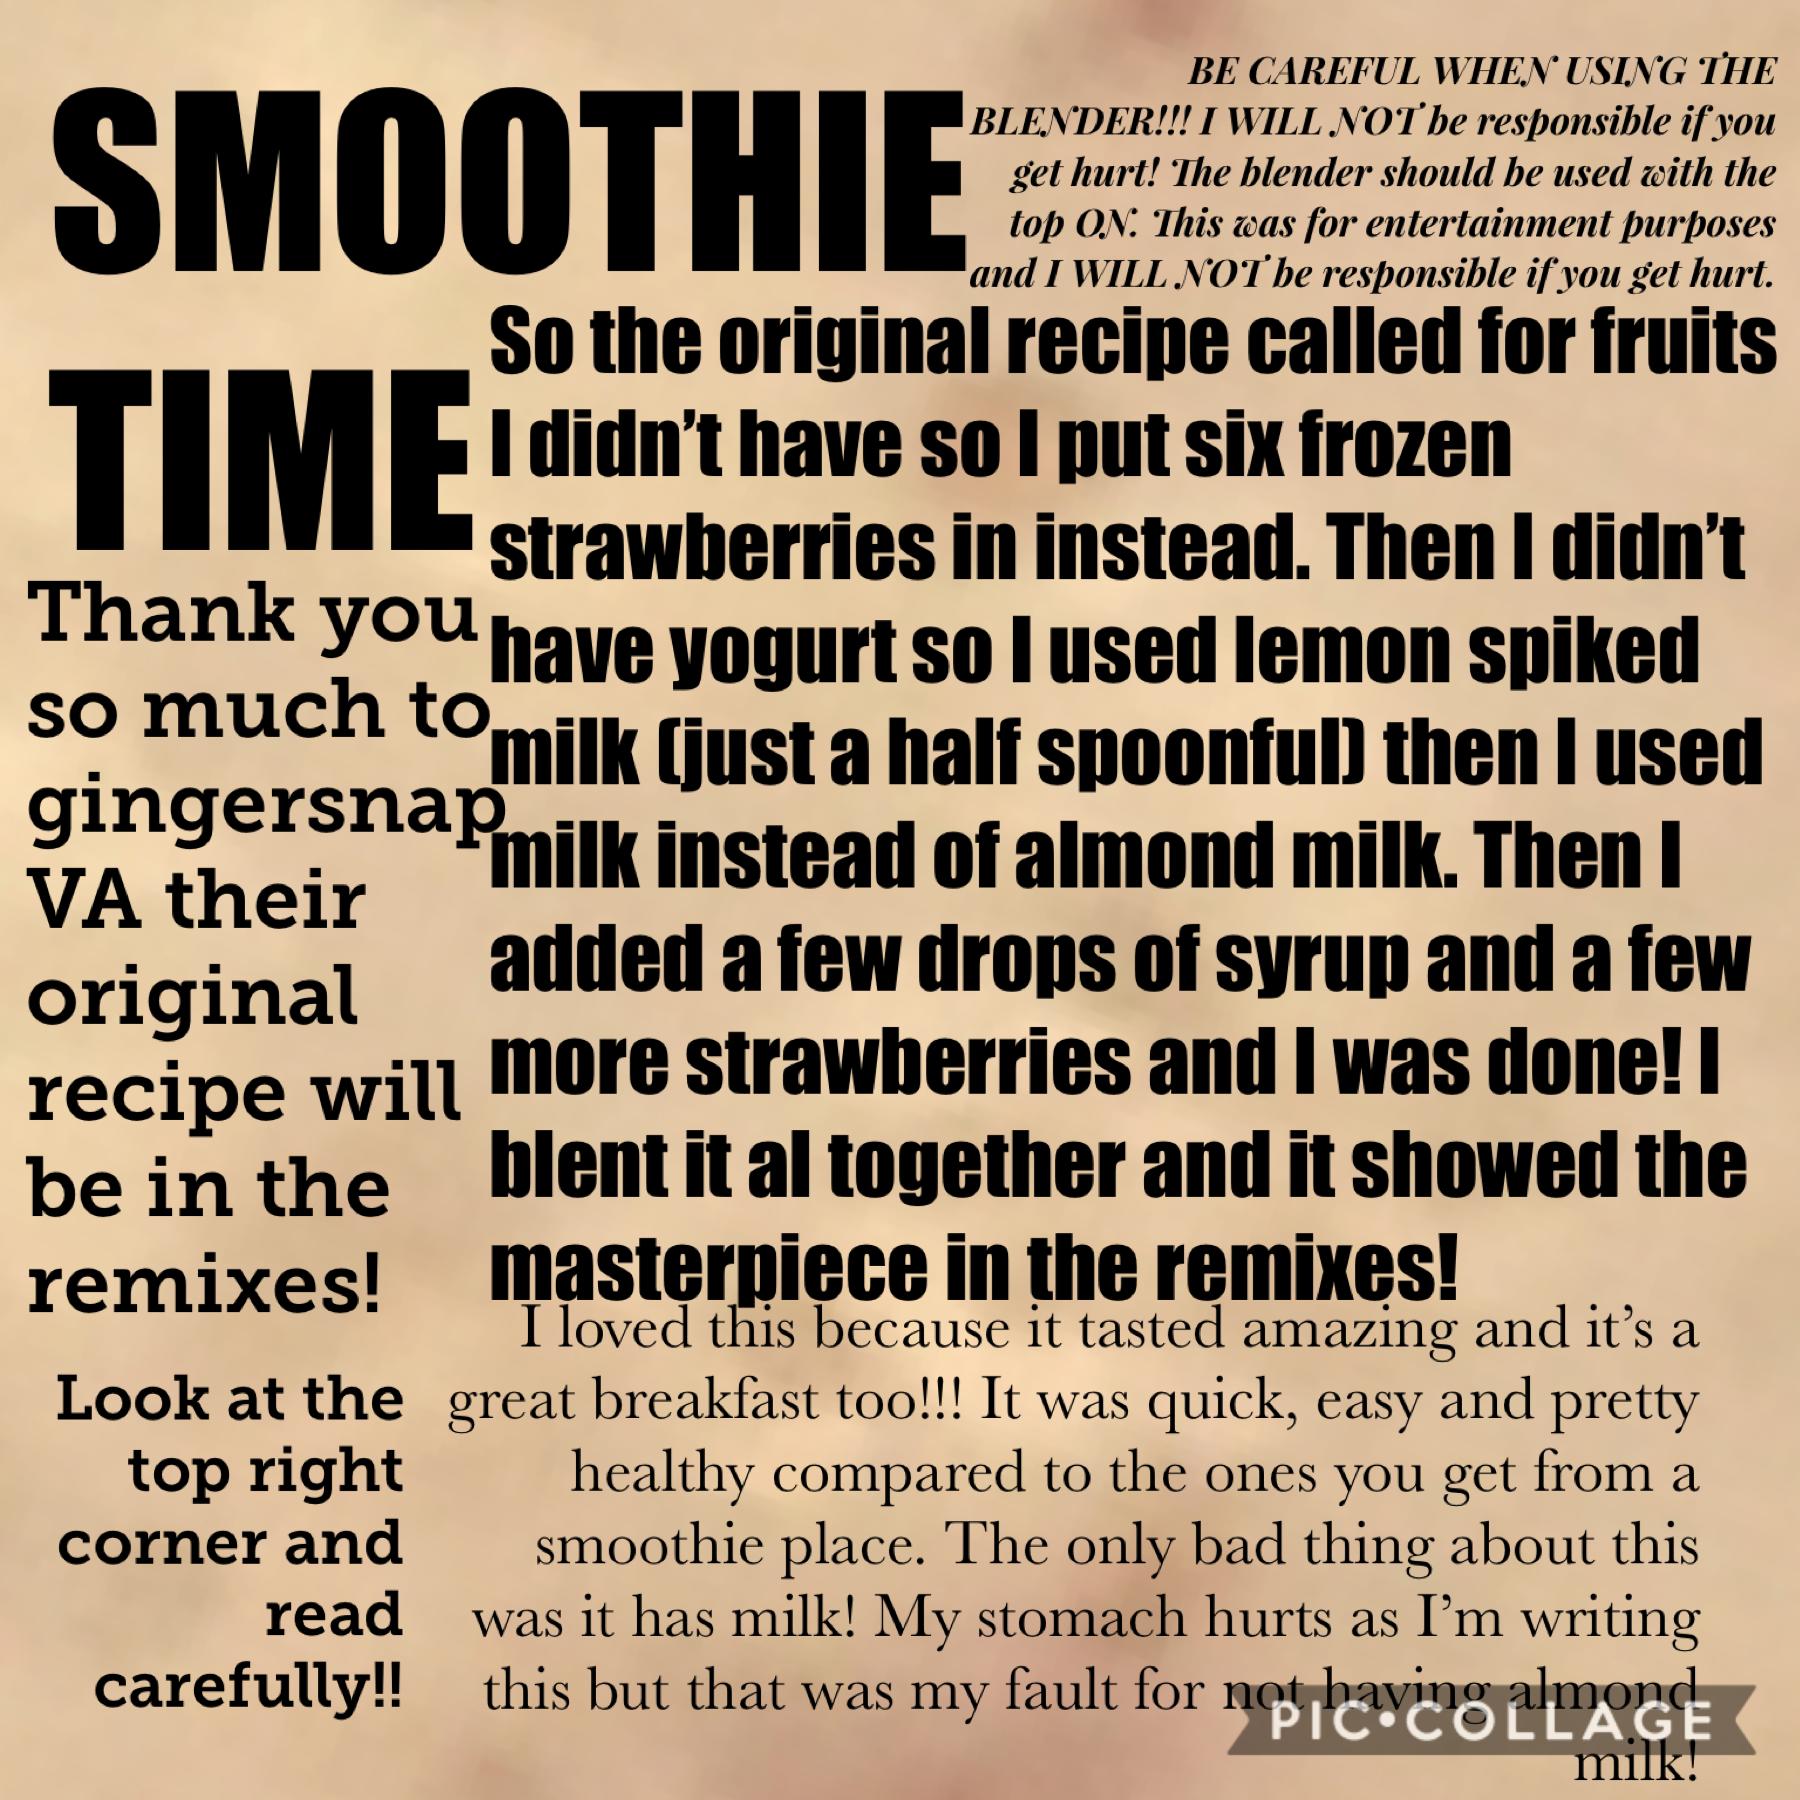 Shout out to GingerSnapVA!!! They gave me this recipe and there were a few other people who asked for a smoothie recipe too so here it is!!! 😃😃